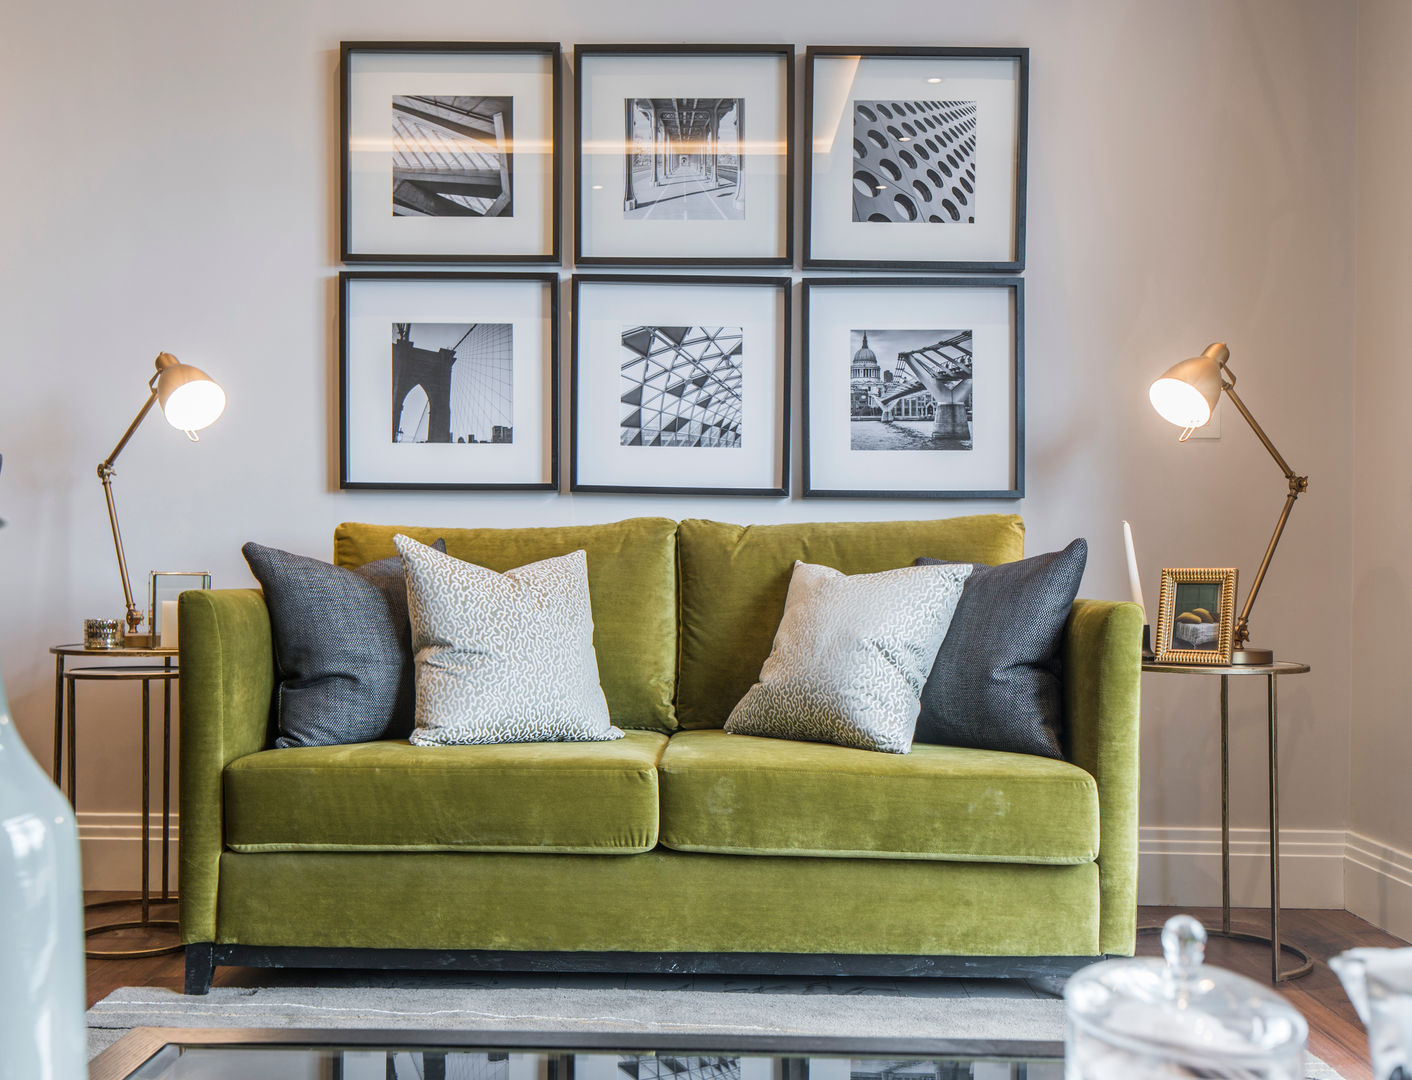 Musewll Hill, London Jigsaw Interior Architecture & Design Living room Copper/Bronze/Brass green sofa,velvet,luxury,picture wall,gallery,textiles,living room,jigsaw interiors,copper,brass